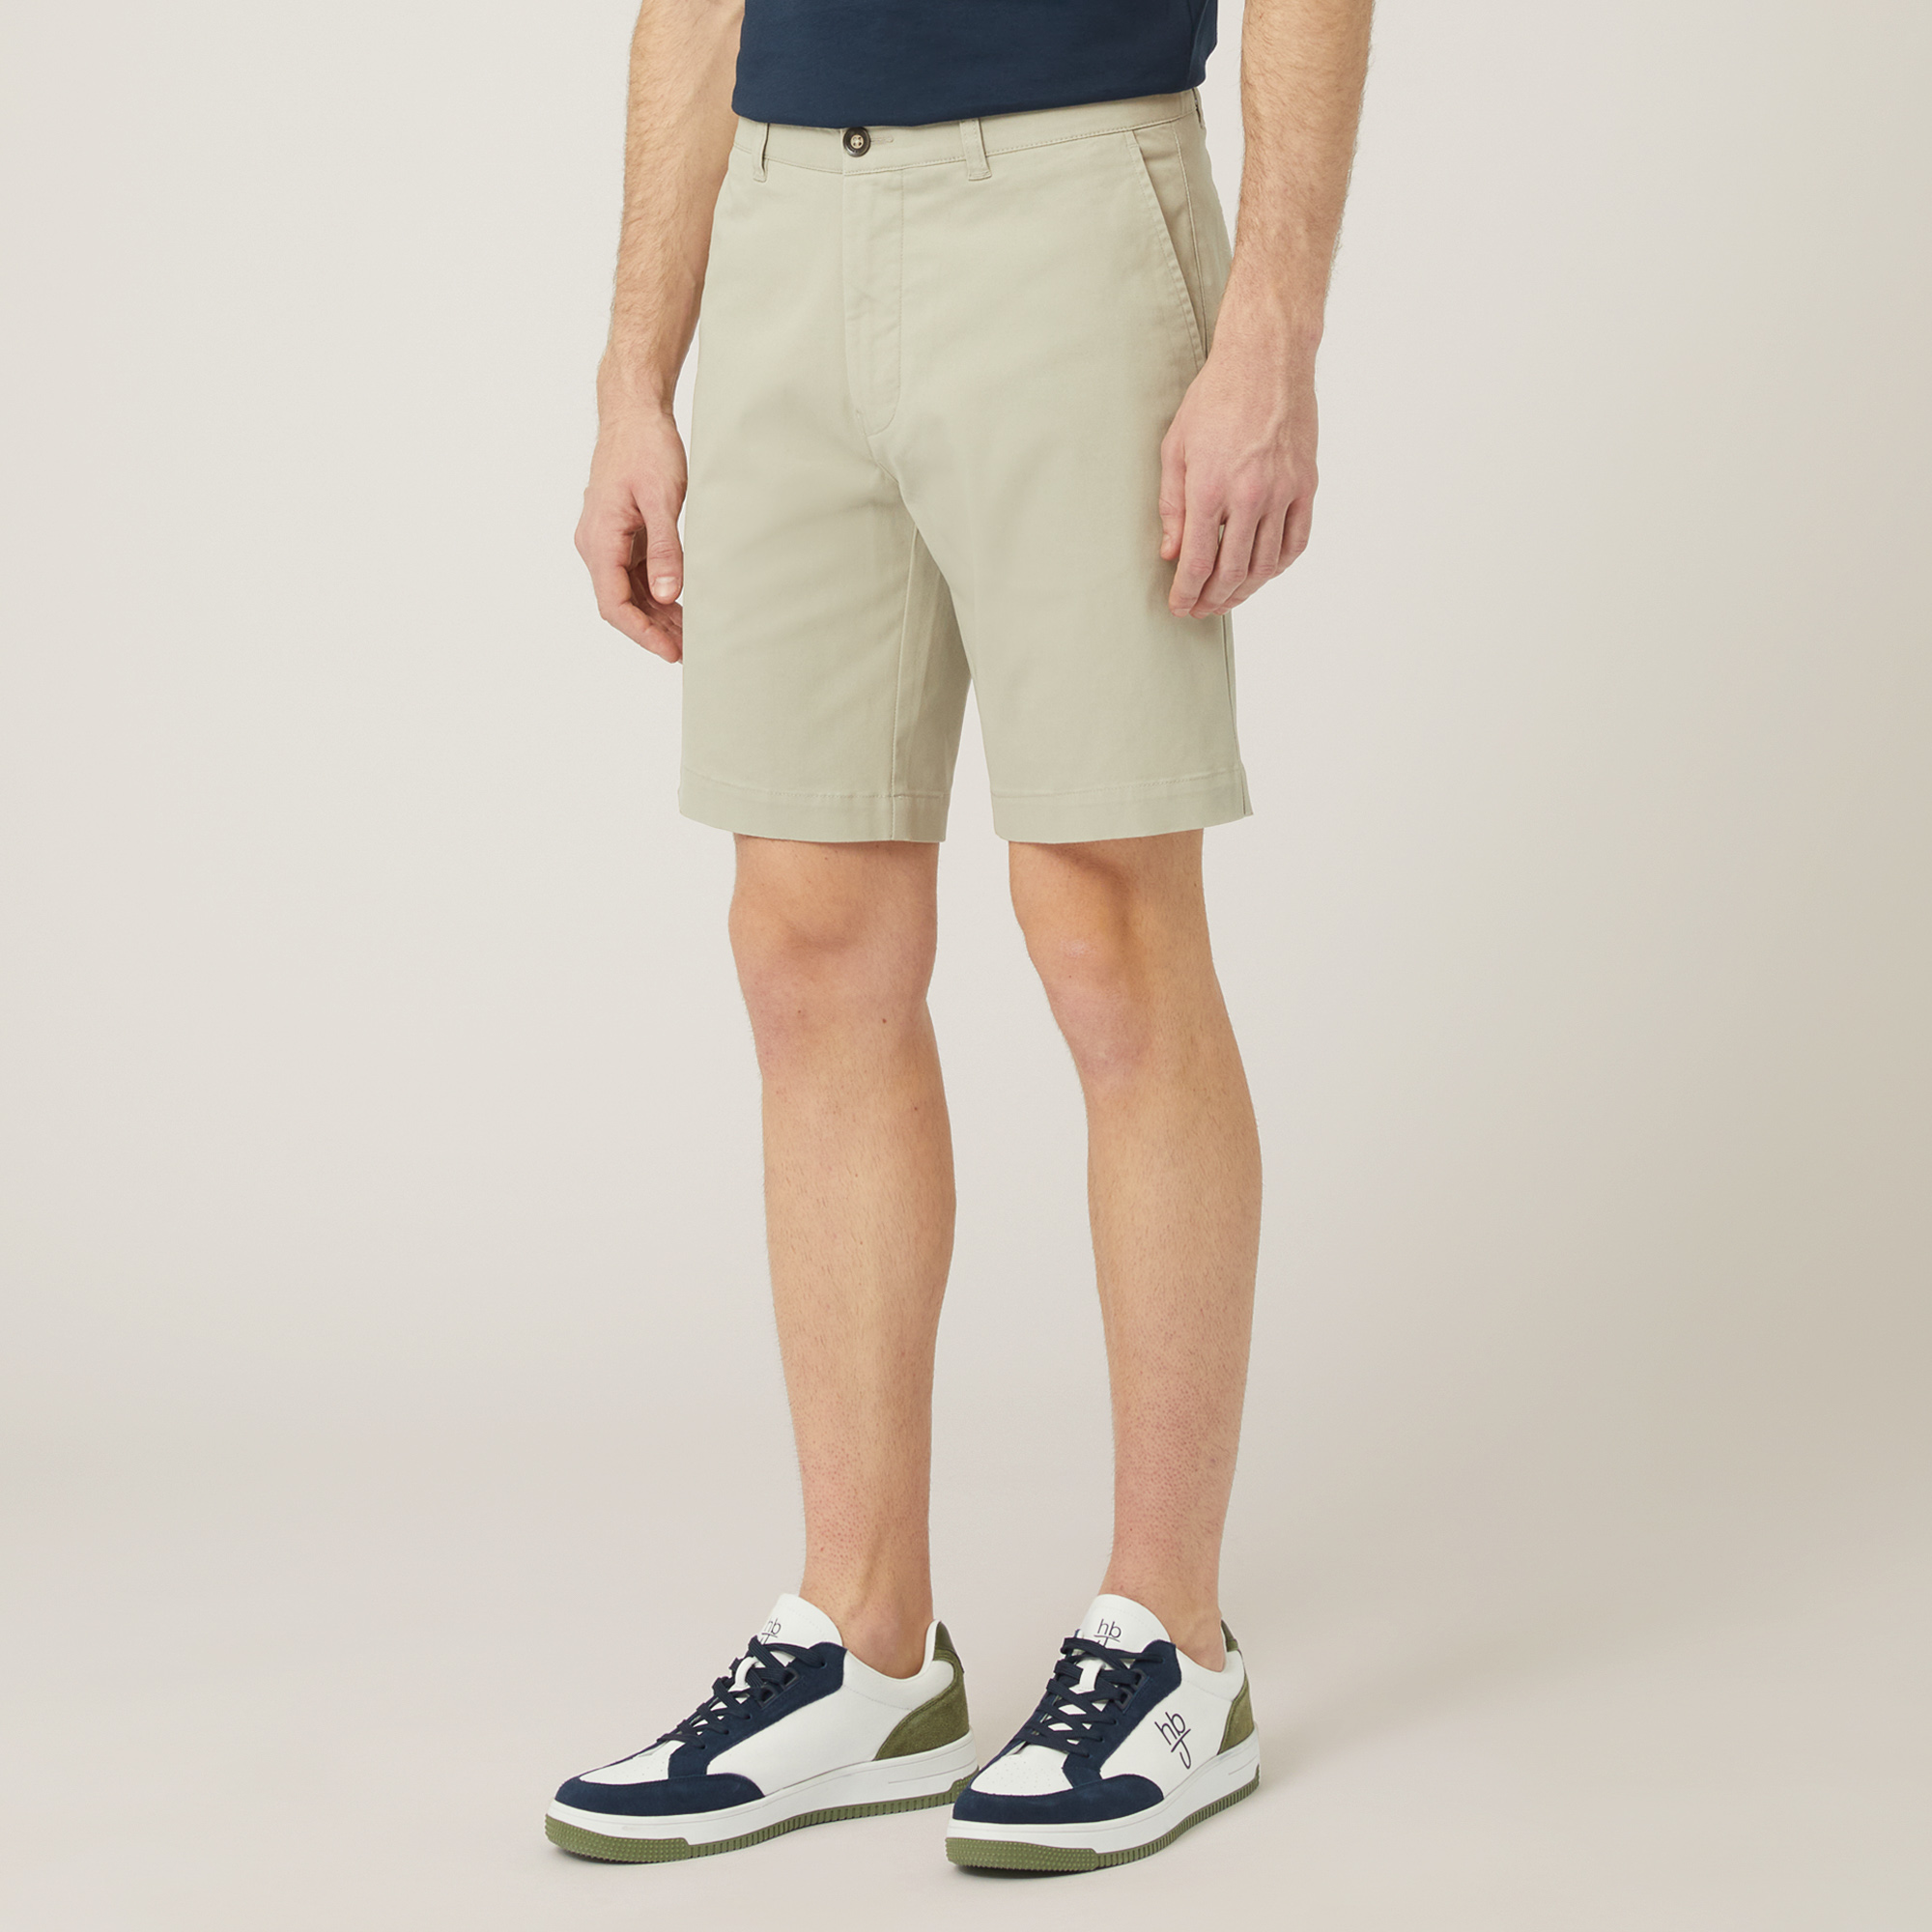 Bermuda Chino In Twill, Beige, large image number 0